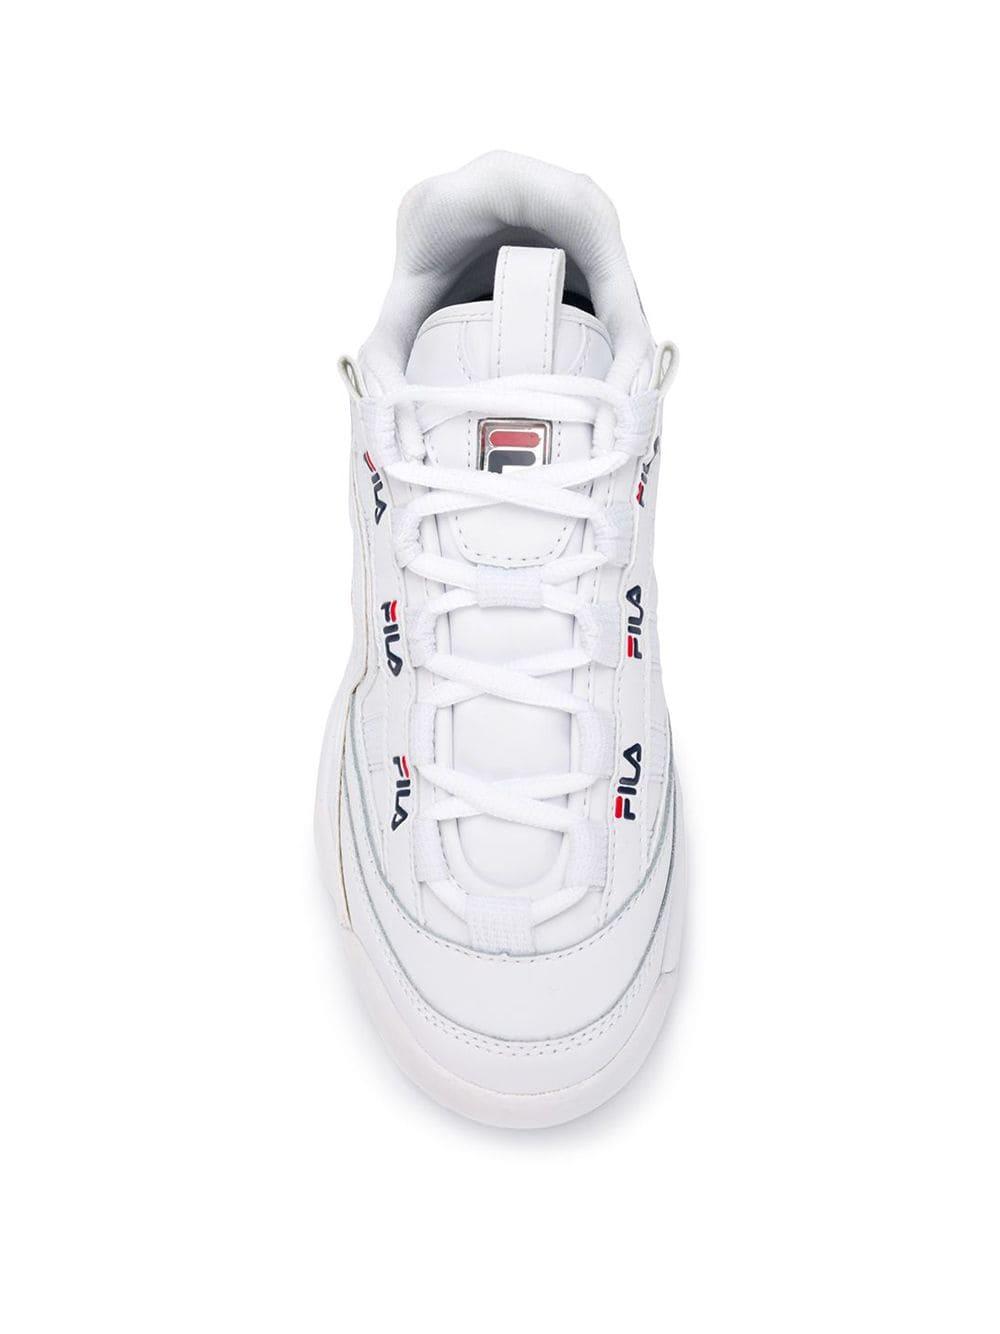 Fila Leather Trailruptor Sneakers in White - Save 47% - Lyst